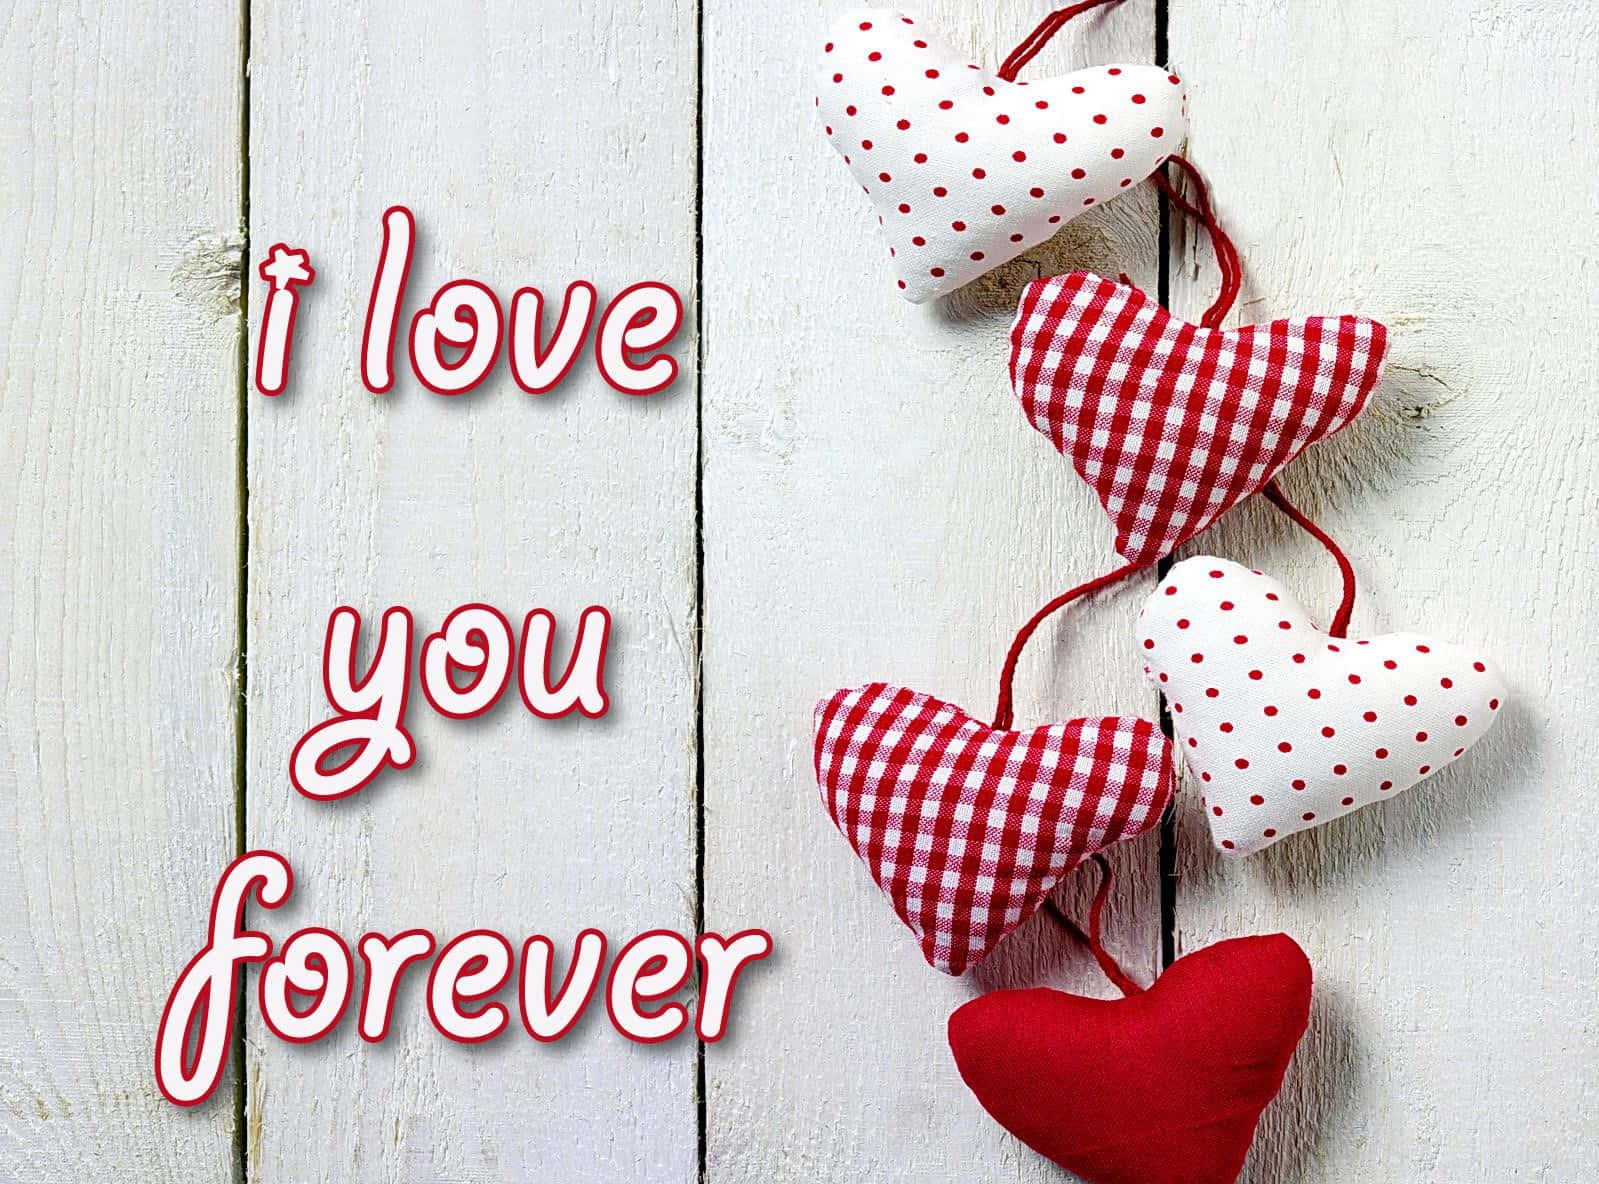 Express your love with the words that say it all - "I Love You"